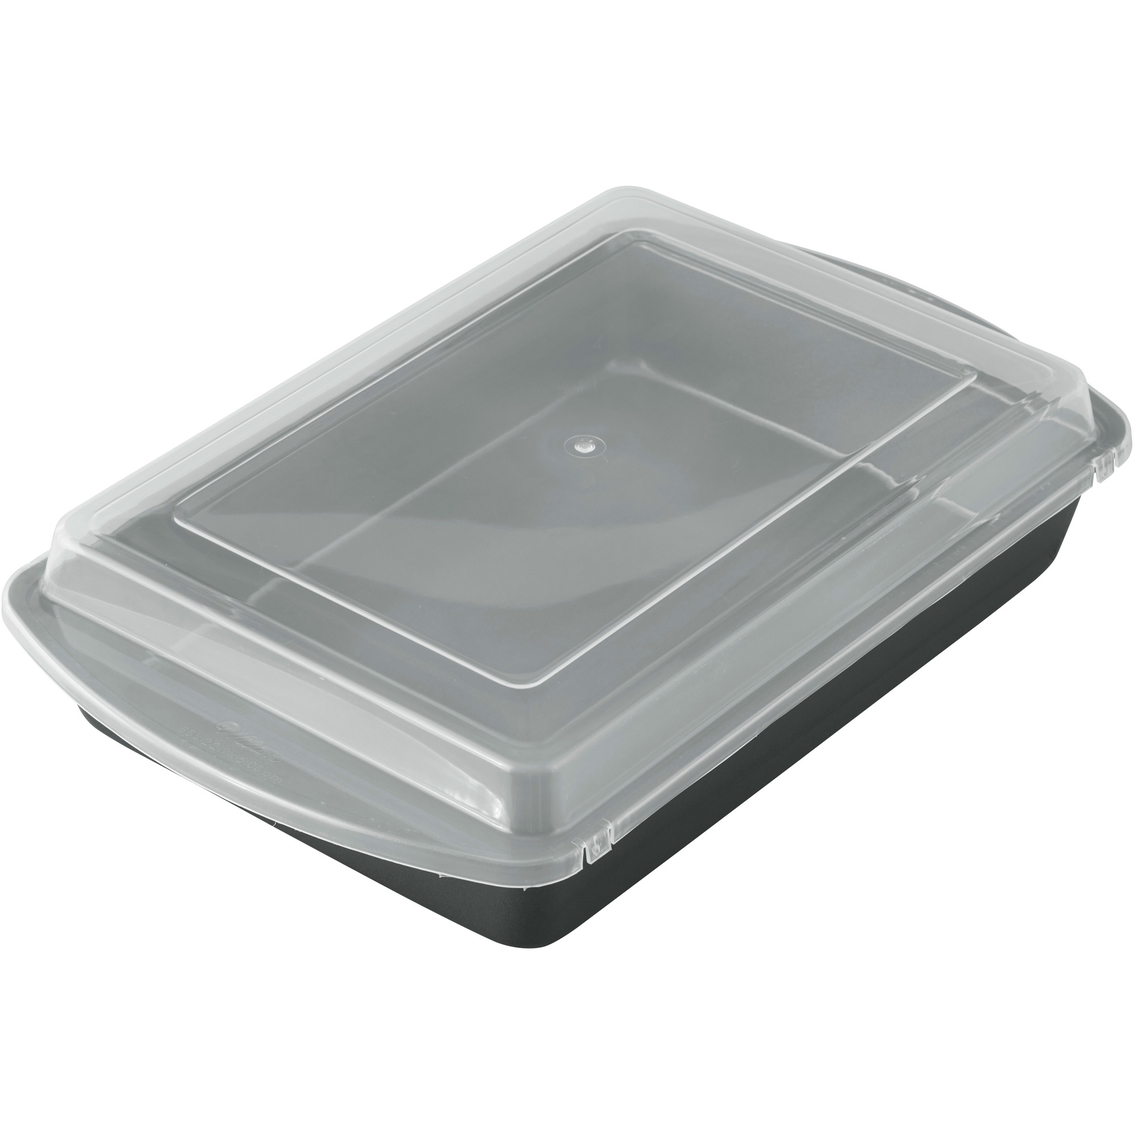 Wilton Perfect Results Oblong Pan w/ Lid, 13.25 x 9.25 in